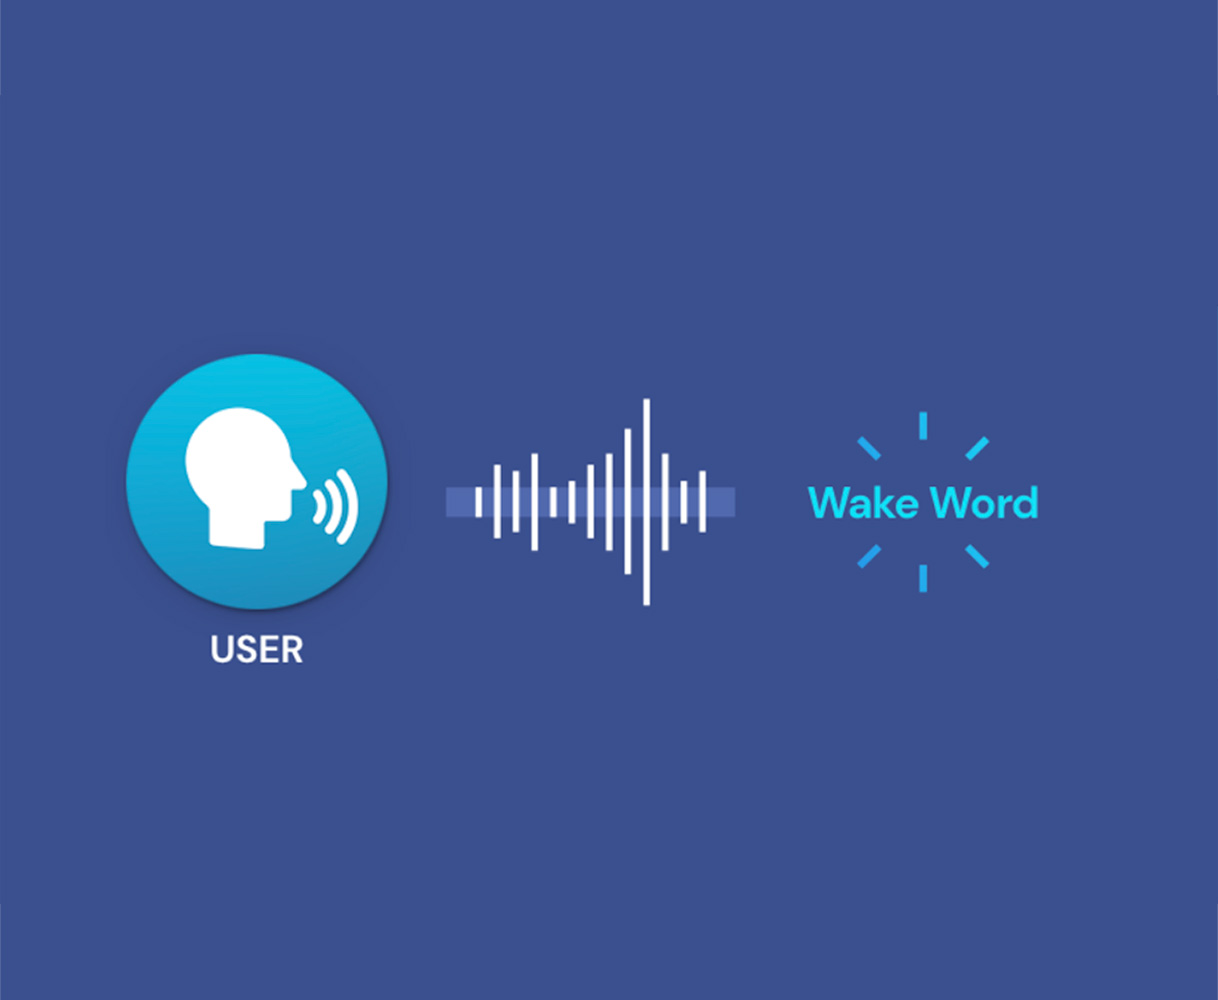 An image of a voice speaking a wake word